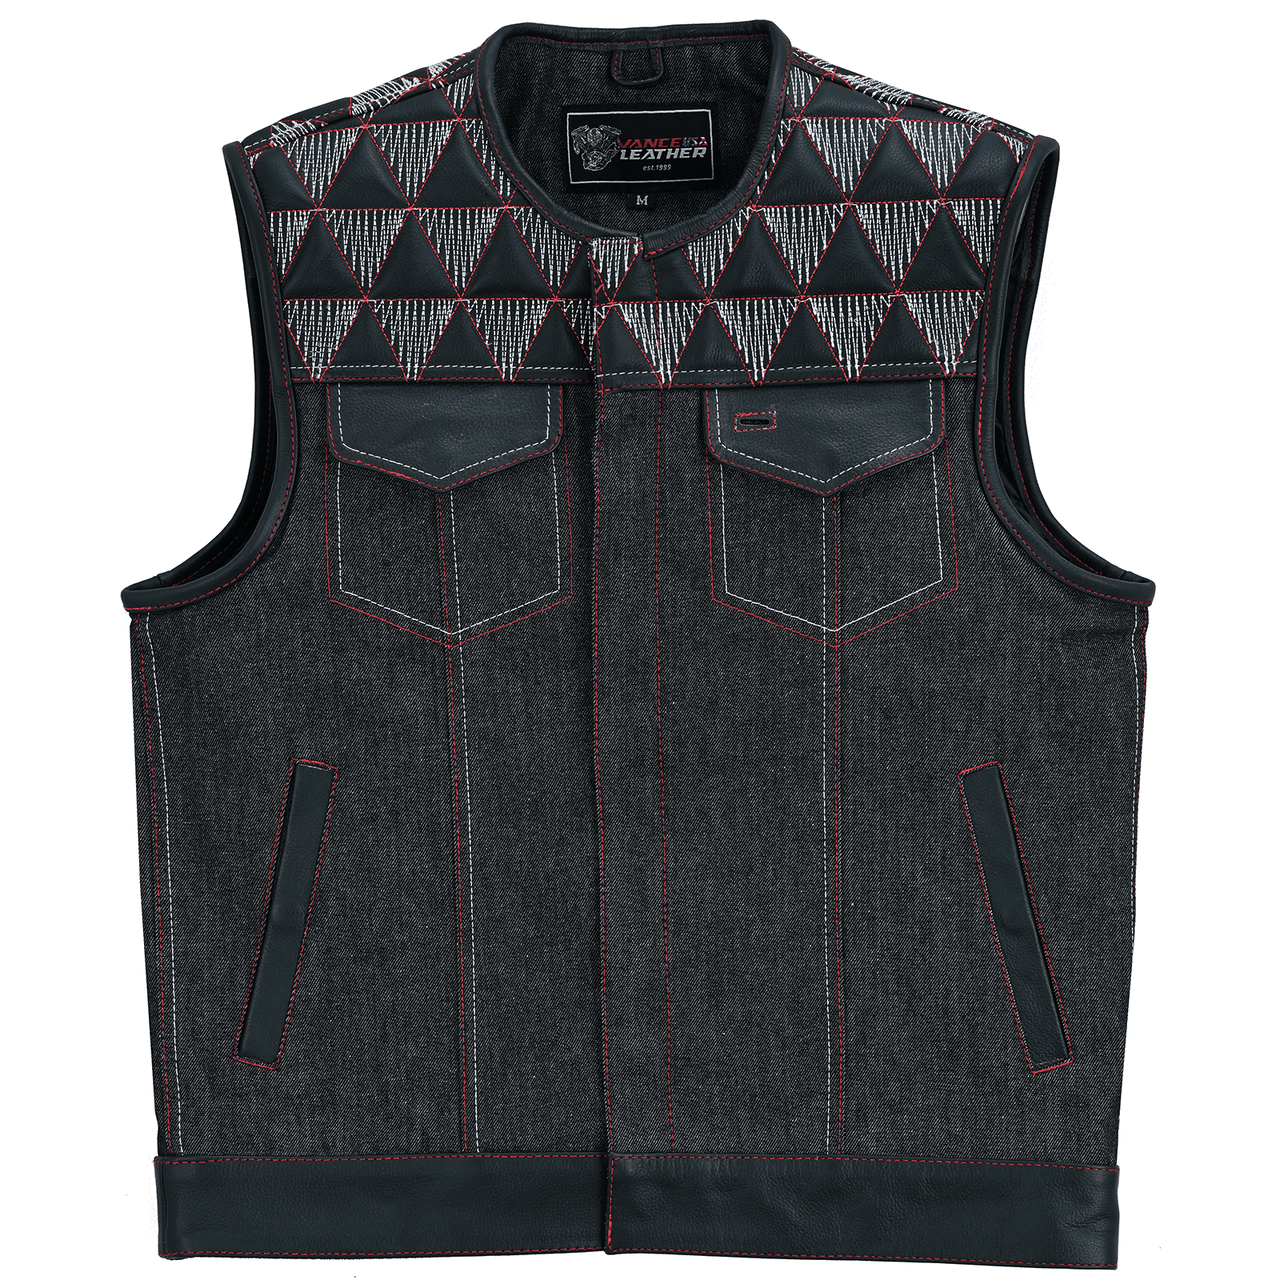 Men's-Denim-Leather-Motorcycle-Vest-with-Conceal-Carry-Pockets-SOA-Biker-Club-Vest-Red-White-Stitching-Front-view